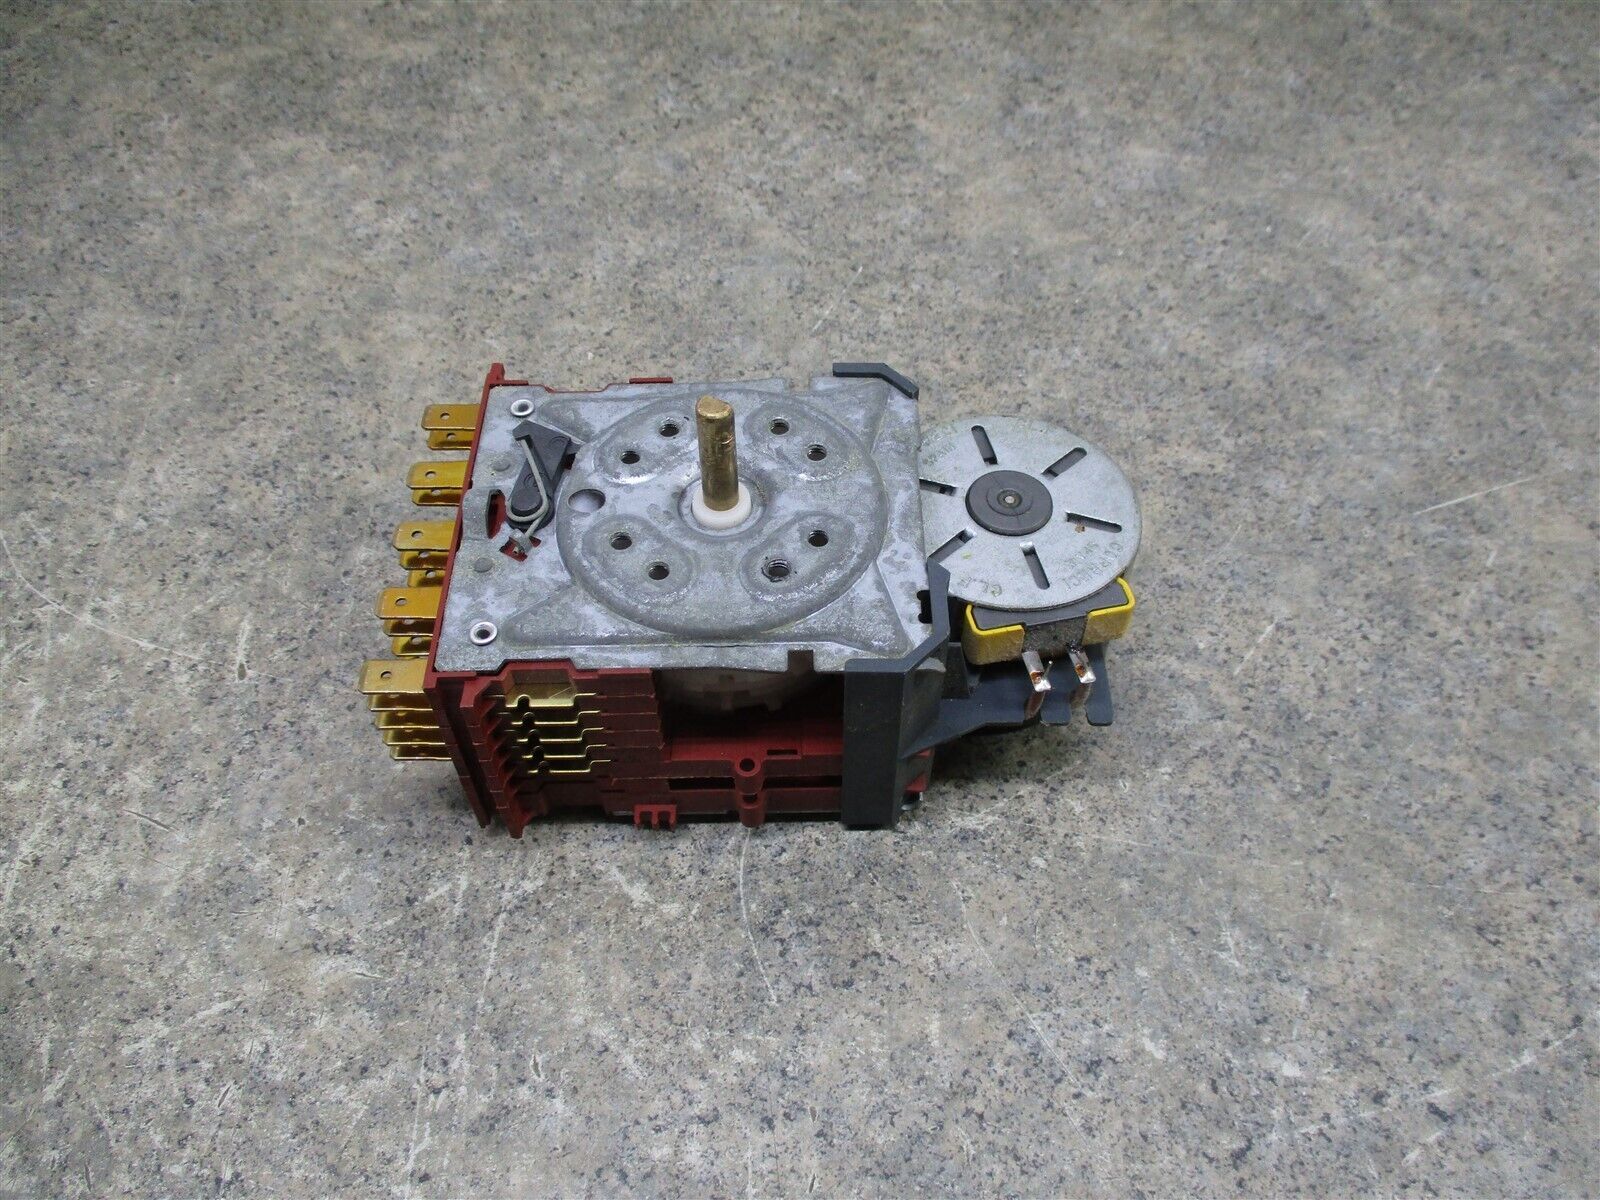 Primary image for HAIER DISHWASHER TIMER PART # DW-7400-01